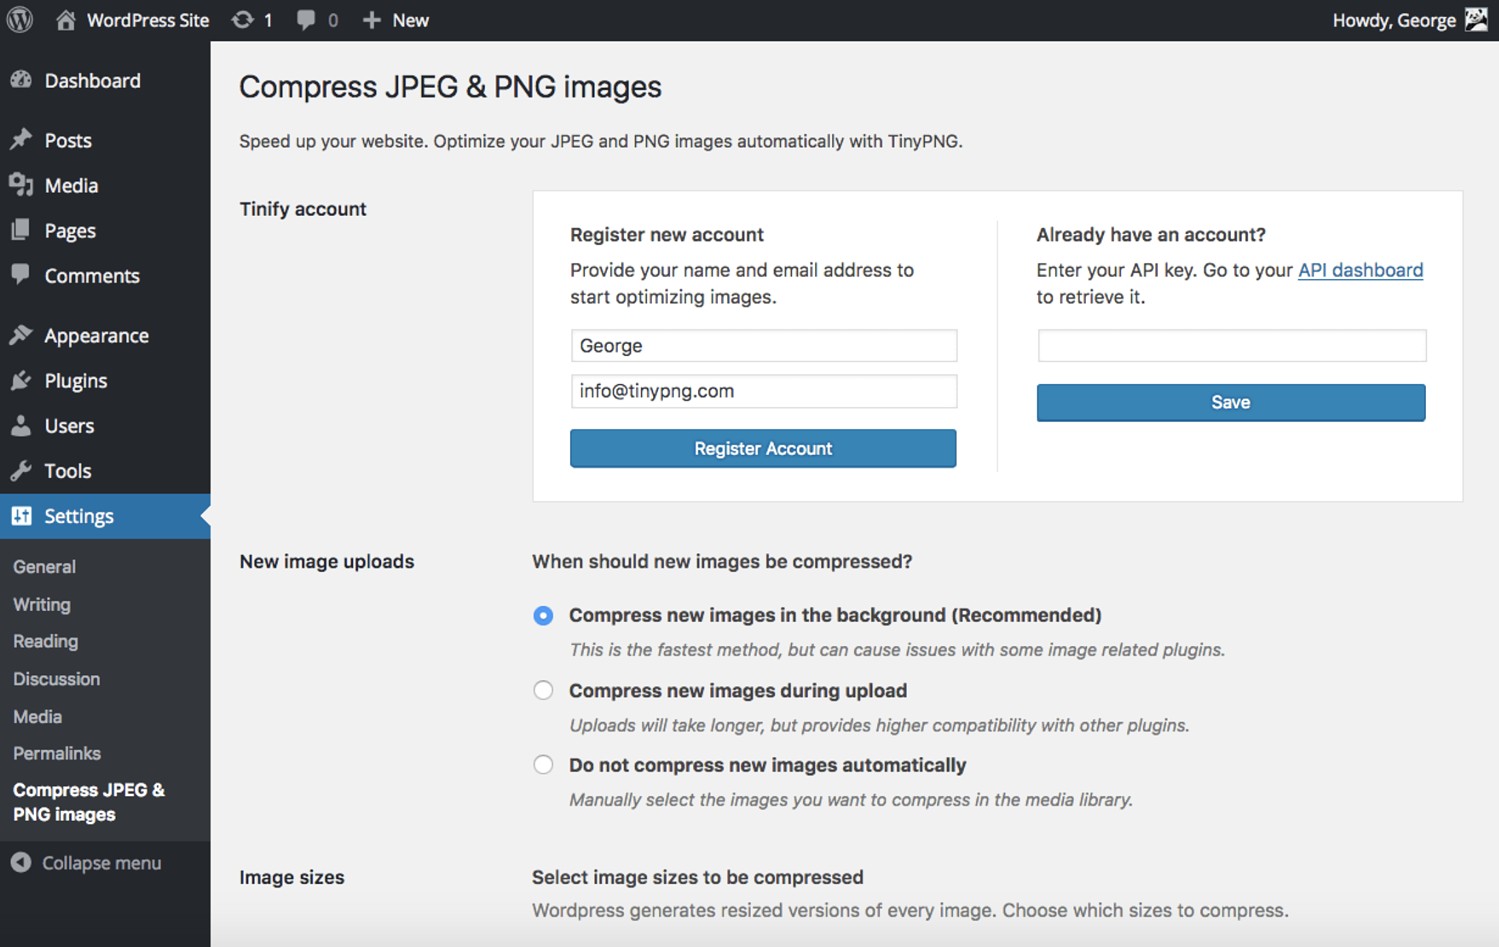 best wordpress plugins for marketers: tinypng